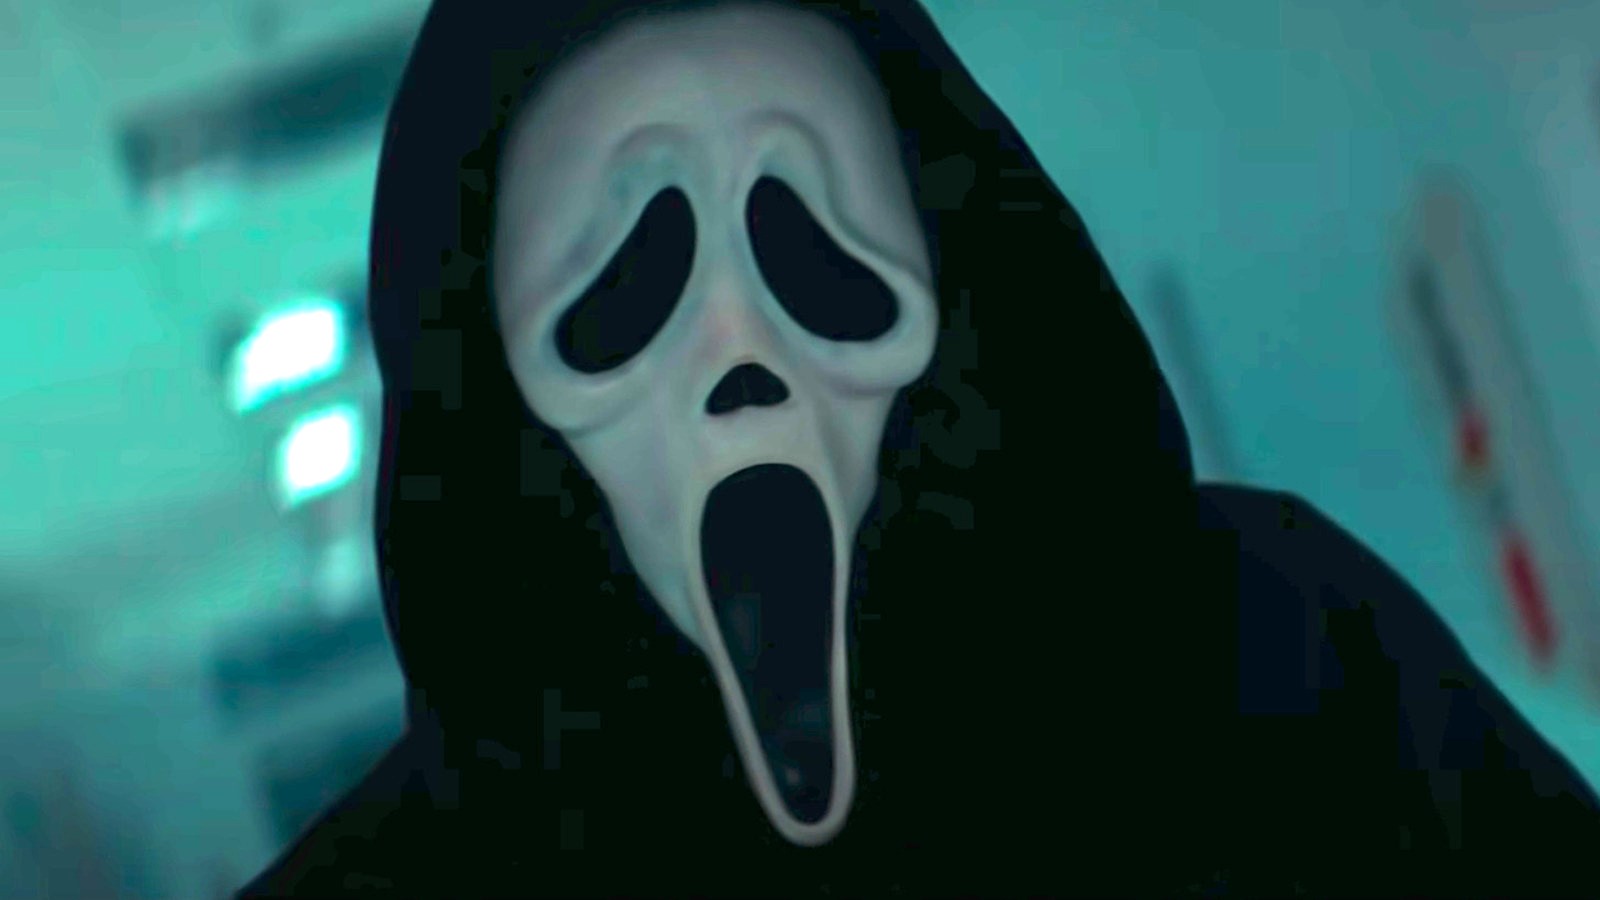 Happy birthday Ghostface! ‘Scream’ turns 26 today if you didn’t feel old already